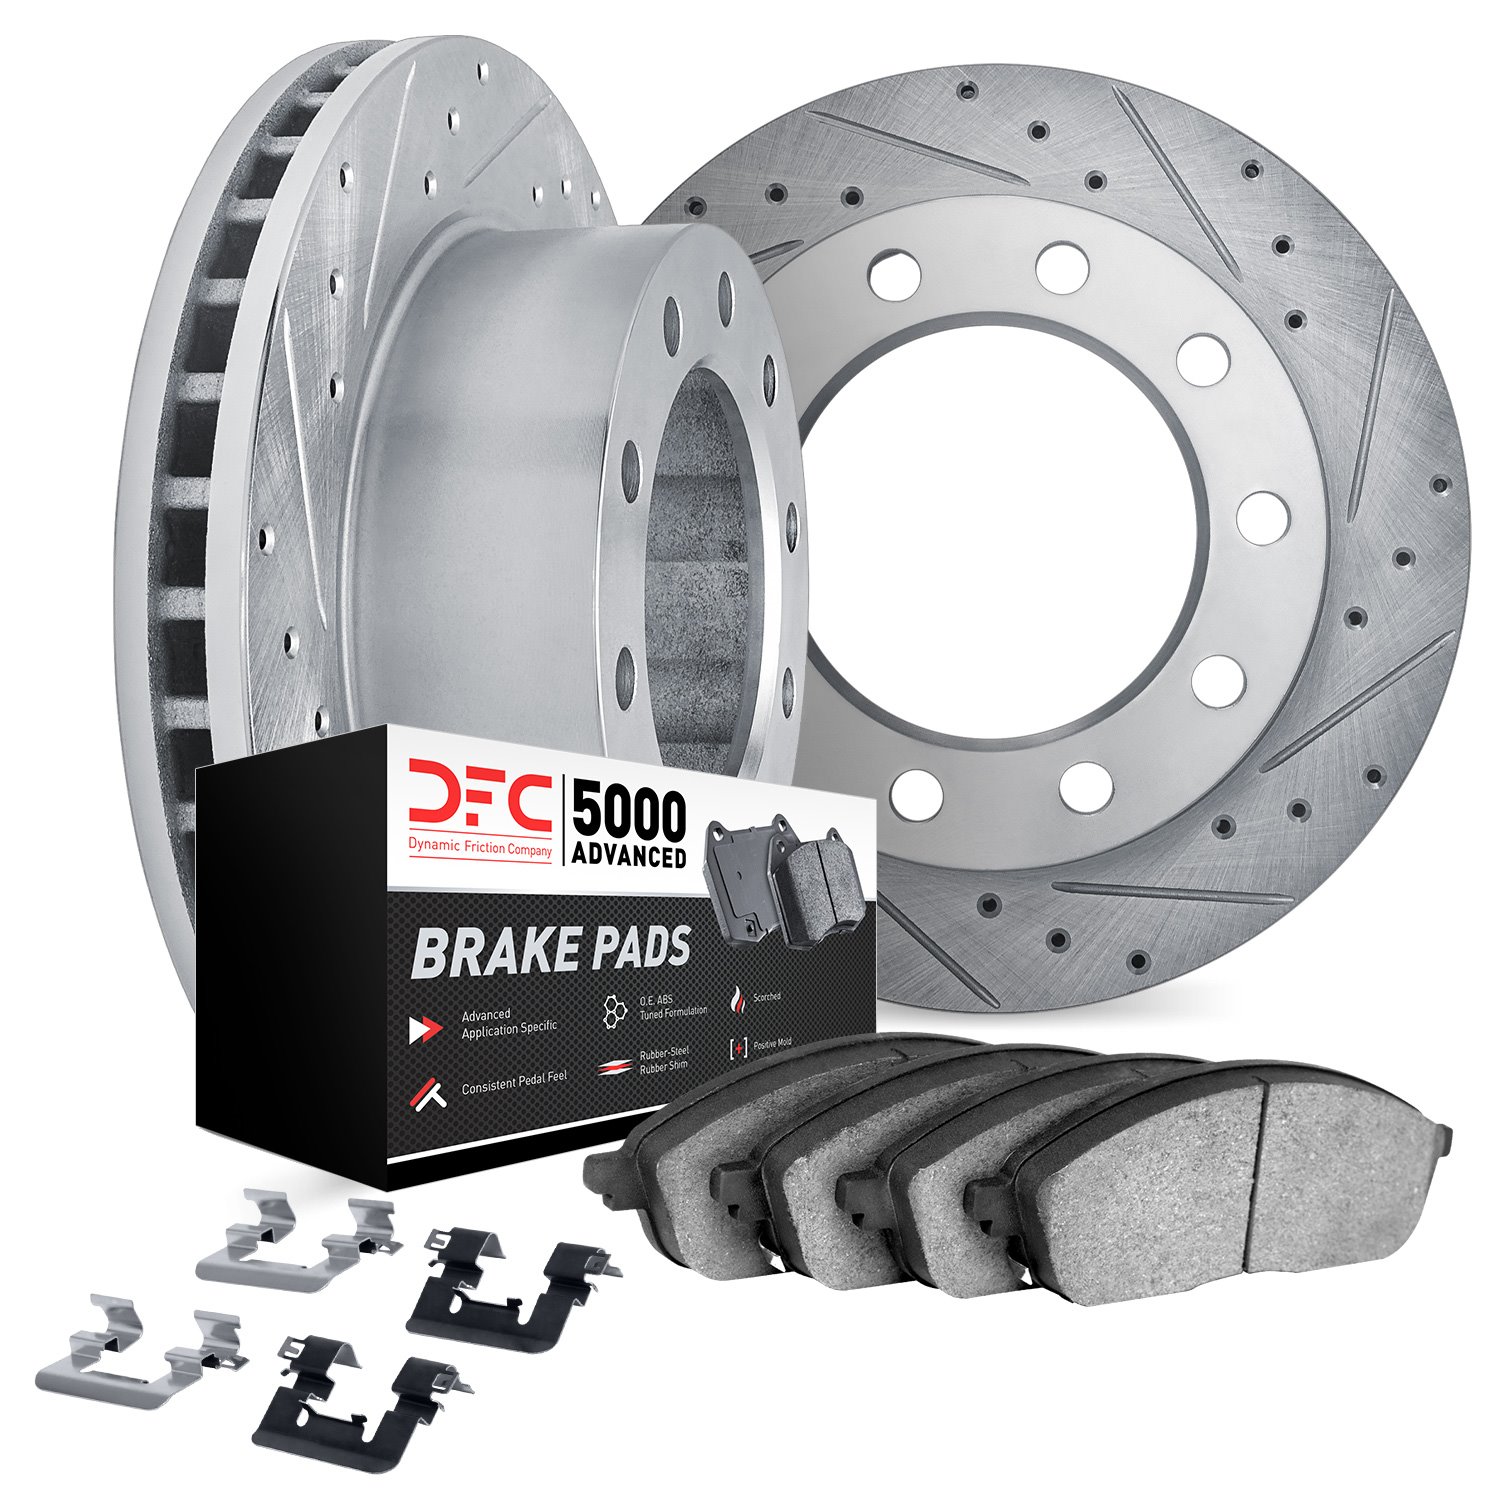 7512-54211 Drilled/Slotted Brake Rotors w/5000 Advanced Brake Pads Kit & Hardware [Silver], Fits Select Ford/Lincoln/Mercury/Maz